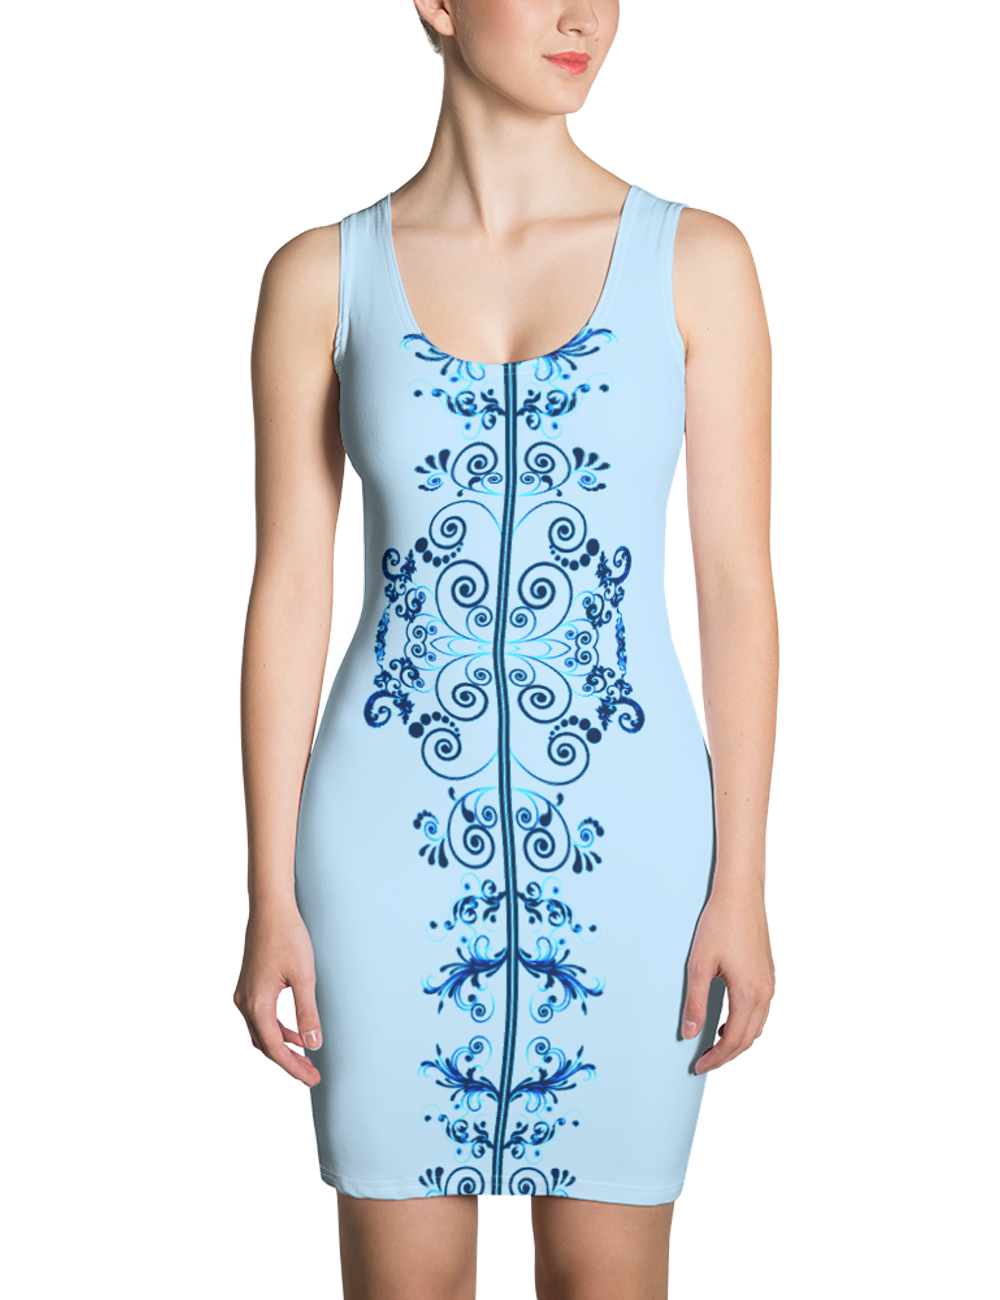 Floral Neon Blue Swirl Sleeveless Fitted Sublimated Dress OniTakai